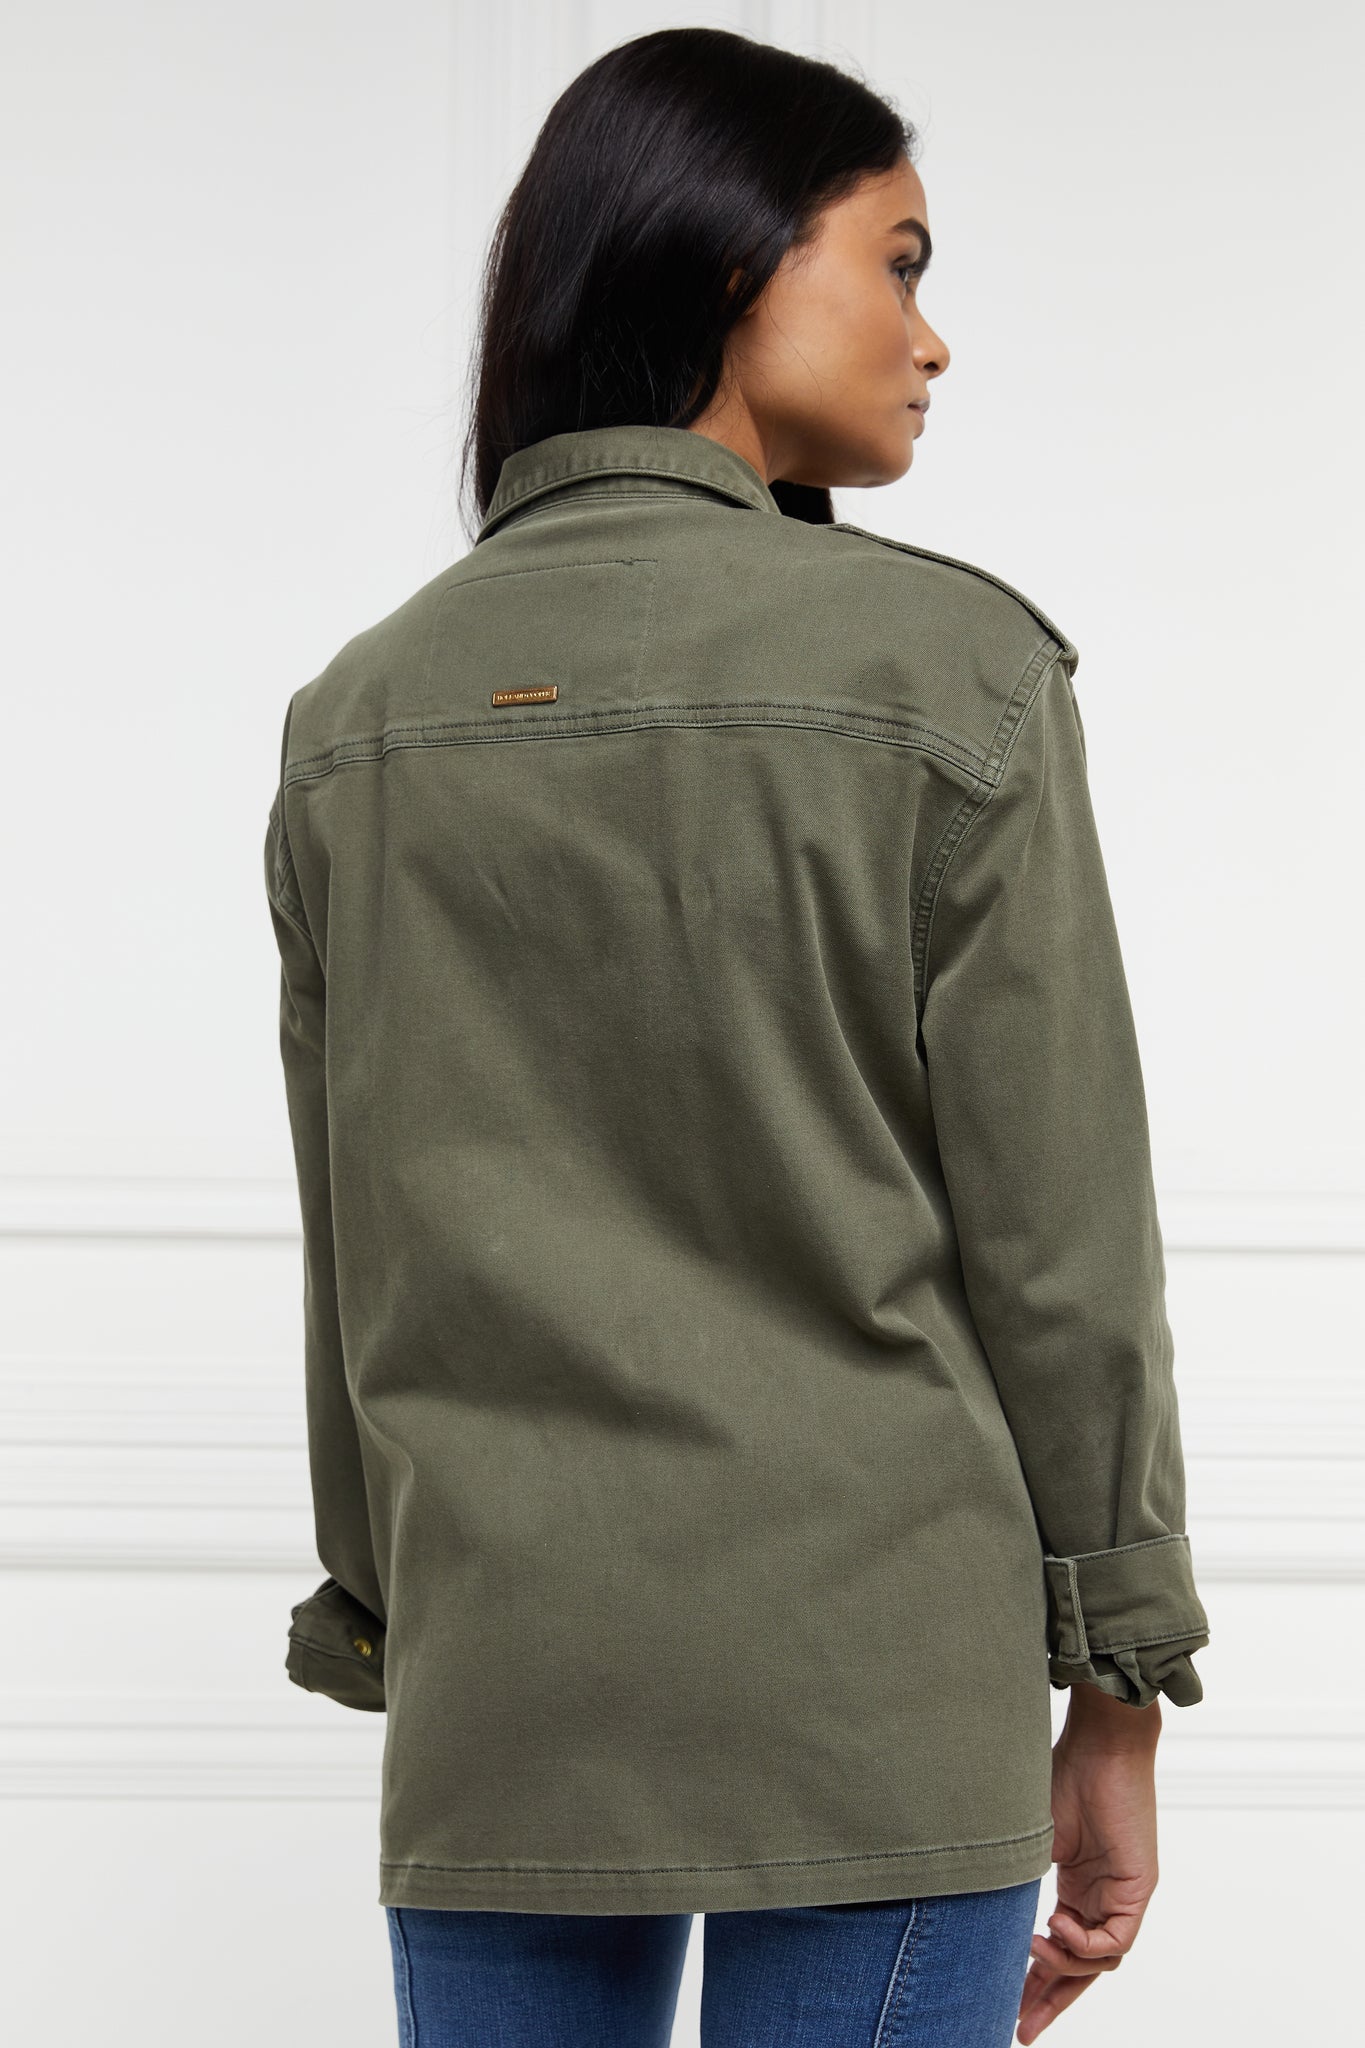 back of Relaxed fit collared artillery style jacket in khaki with four pockets two chest ones being box pleated  and two hip being patch pockets with gold jean button fastenings adjustable long sleeves and epaulette shoulder detail